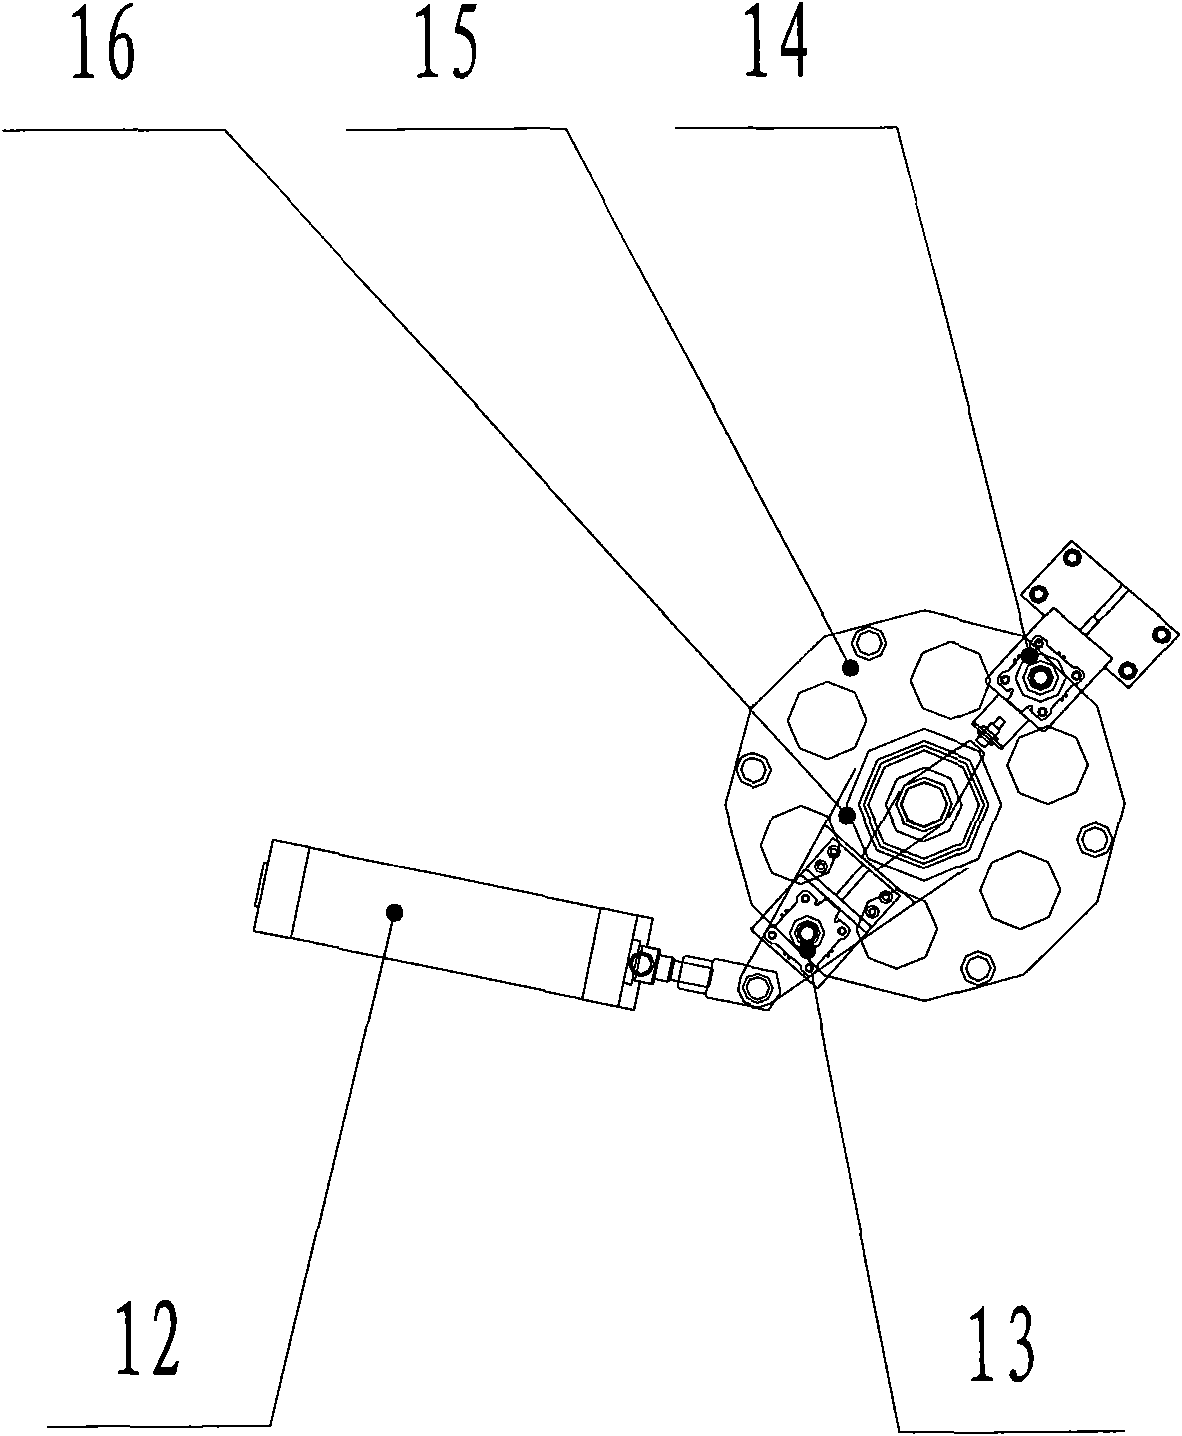 Washer for conveying parts in turntable stepping mode